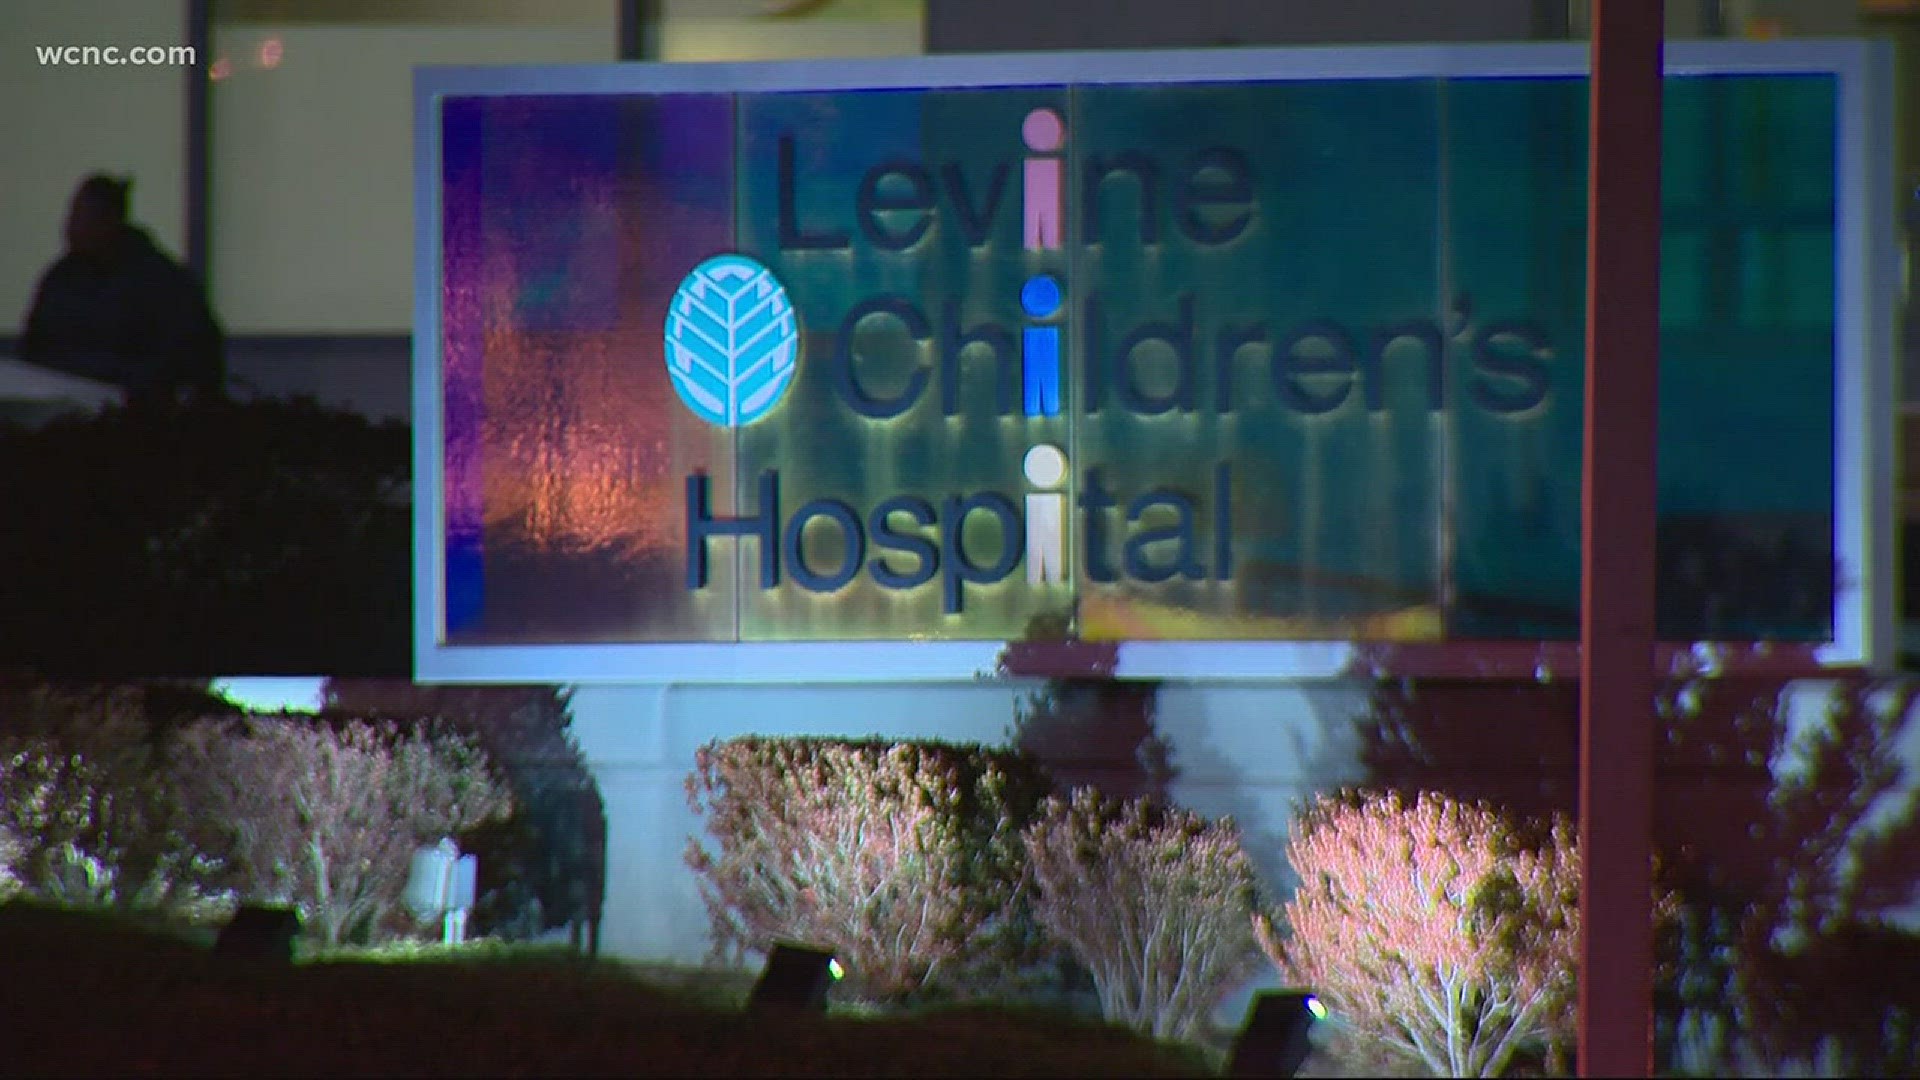 Police in Kannapolis are investigating after a 17-day-old baby died this week.